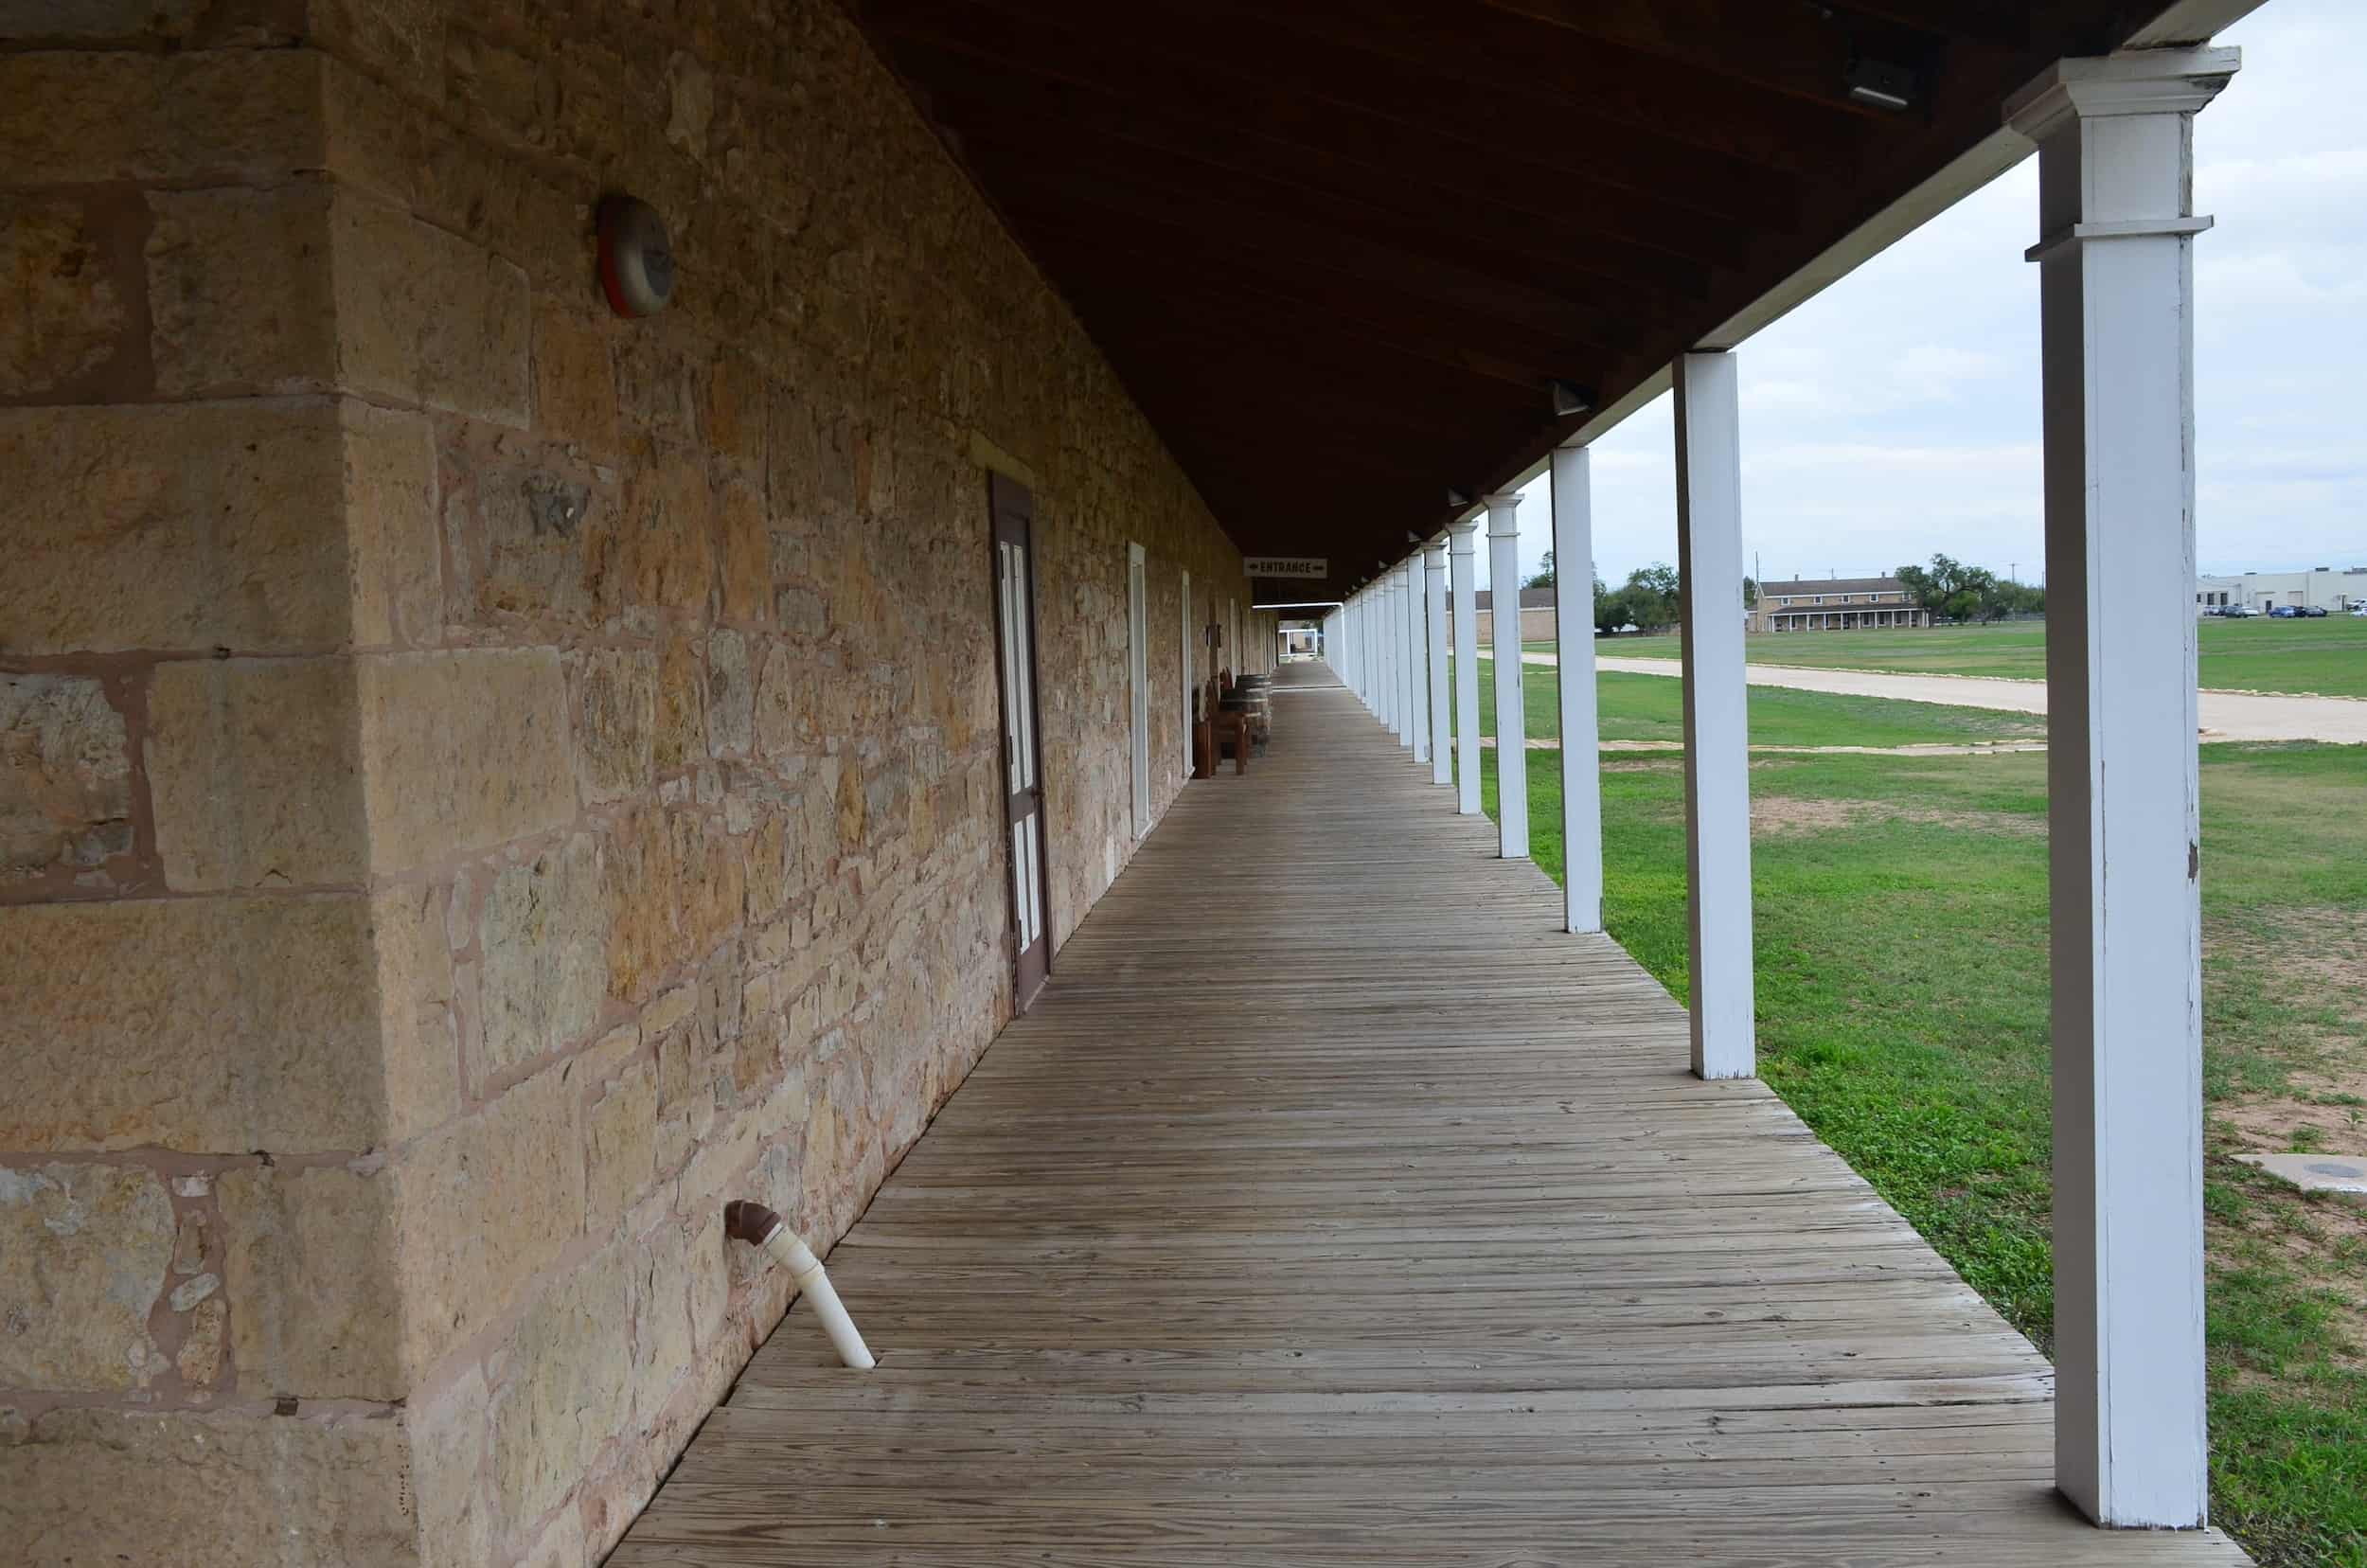 Enlisted Men's Barracks #1 at Fort Concho in San Angelo, Texas